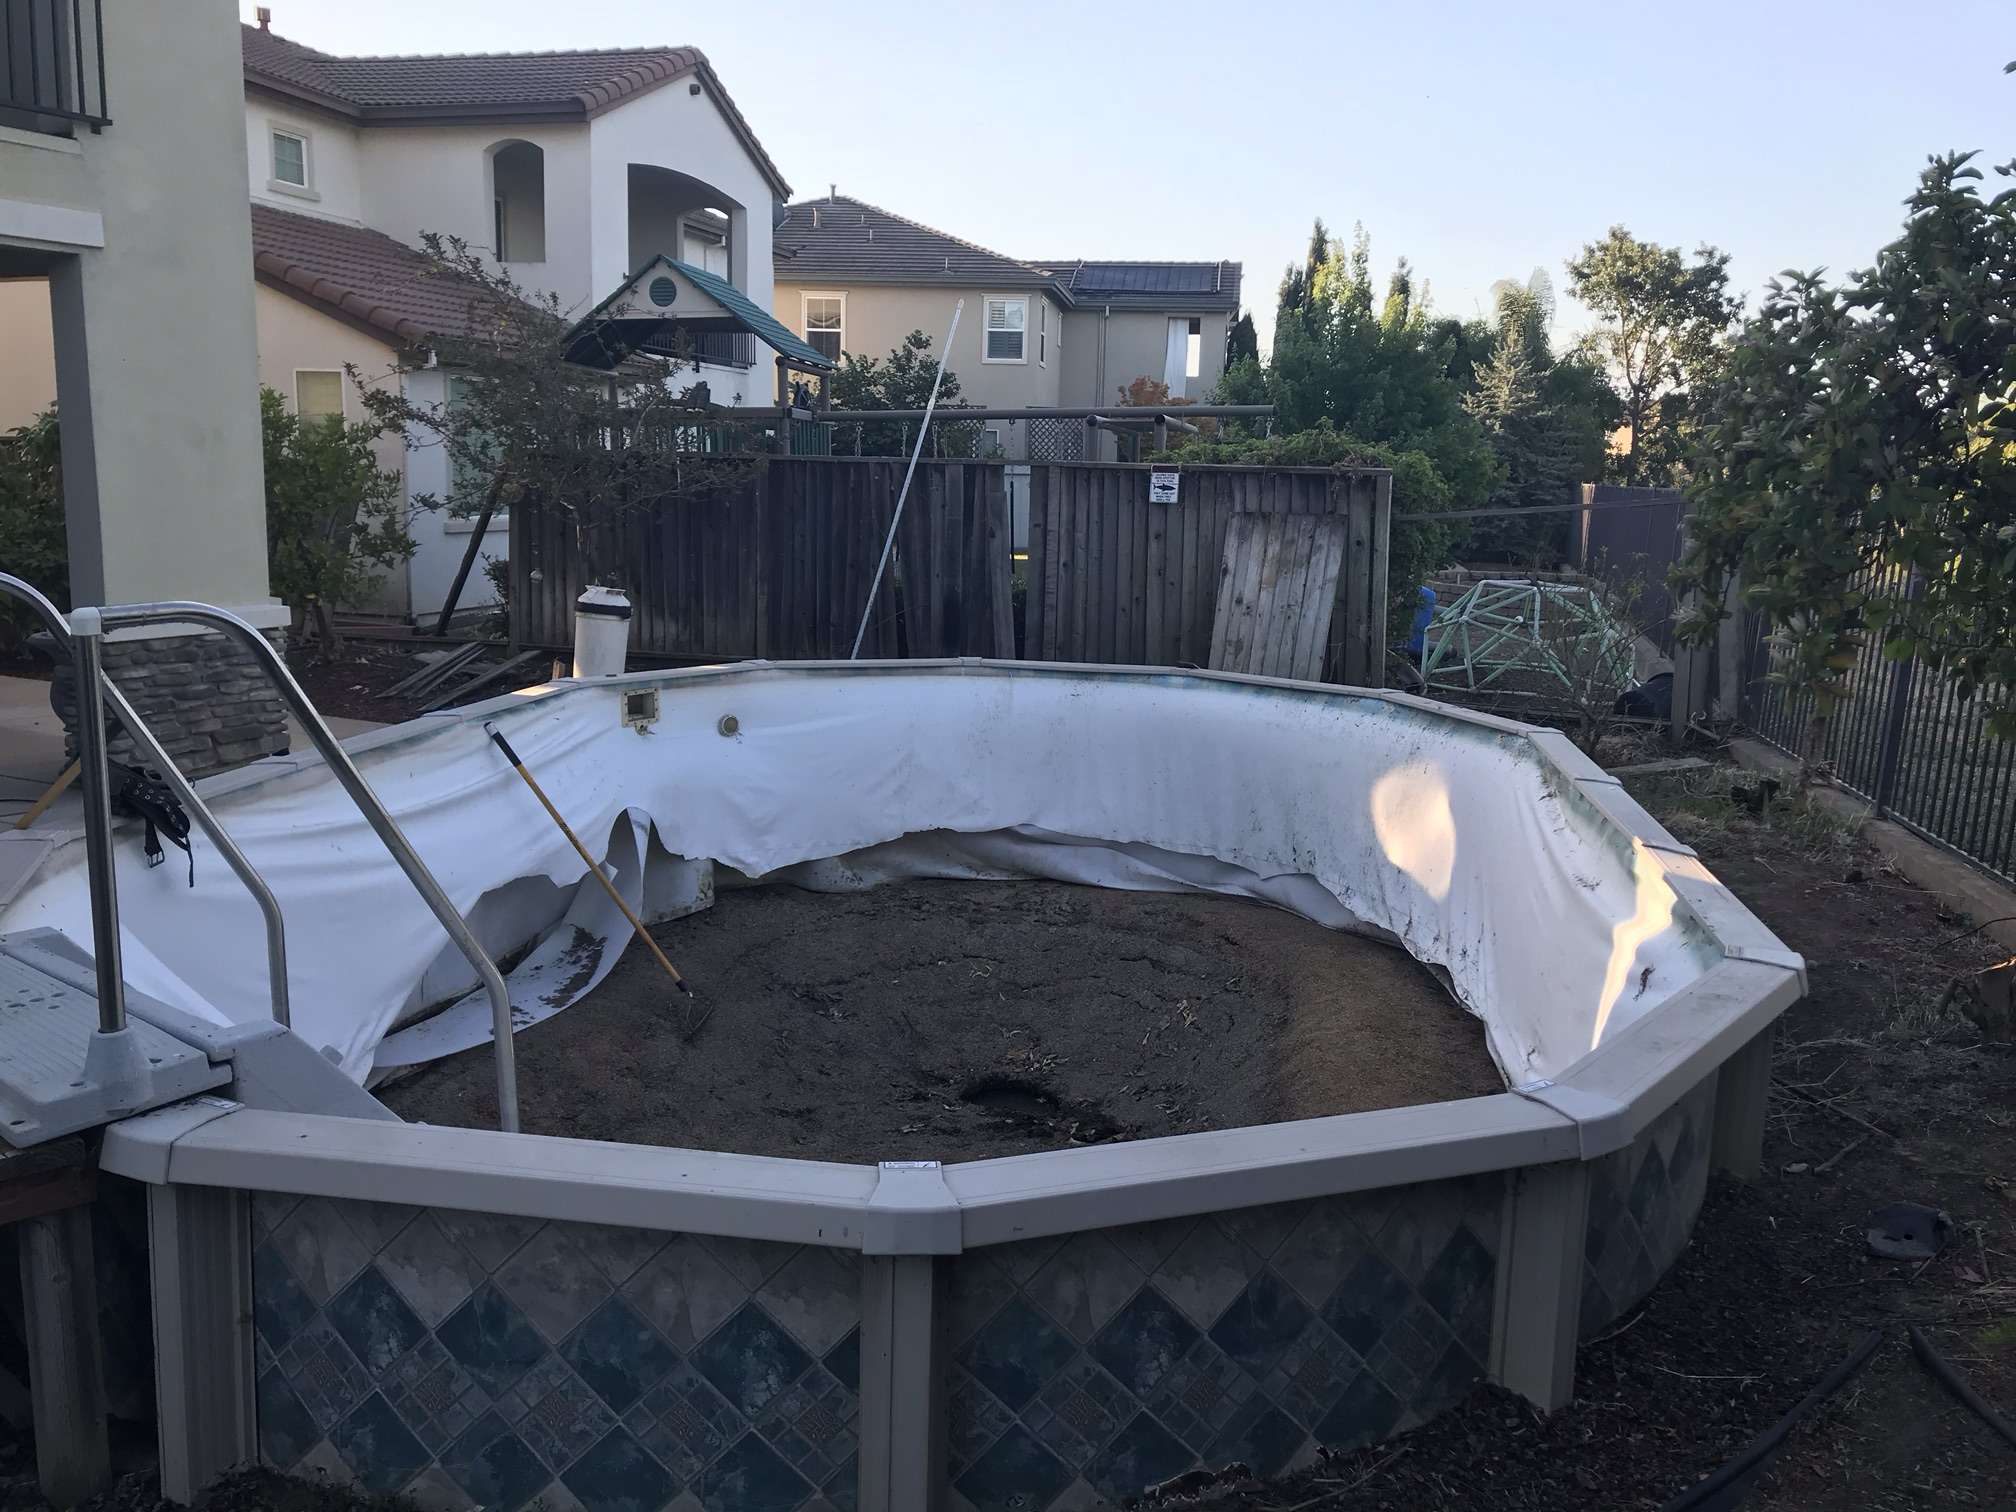 16x24 Above Ground Pool Liner Installation in West Sacramento, CA ...